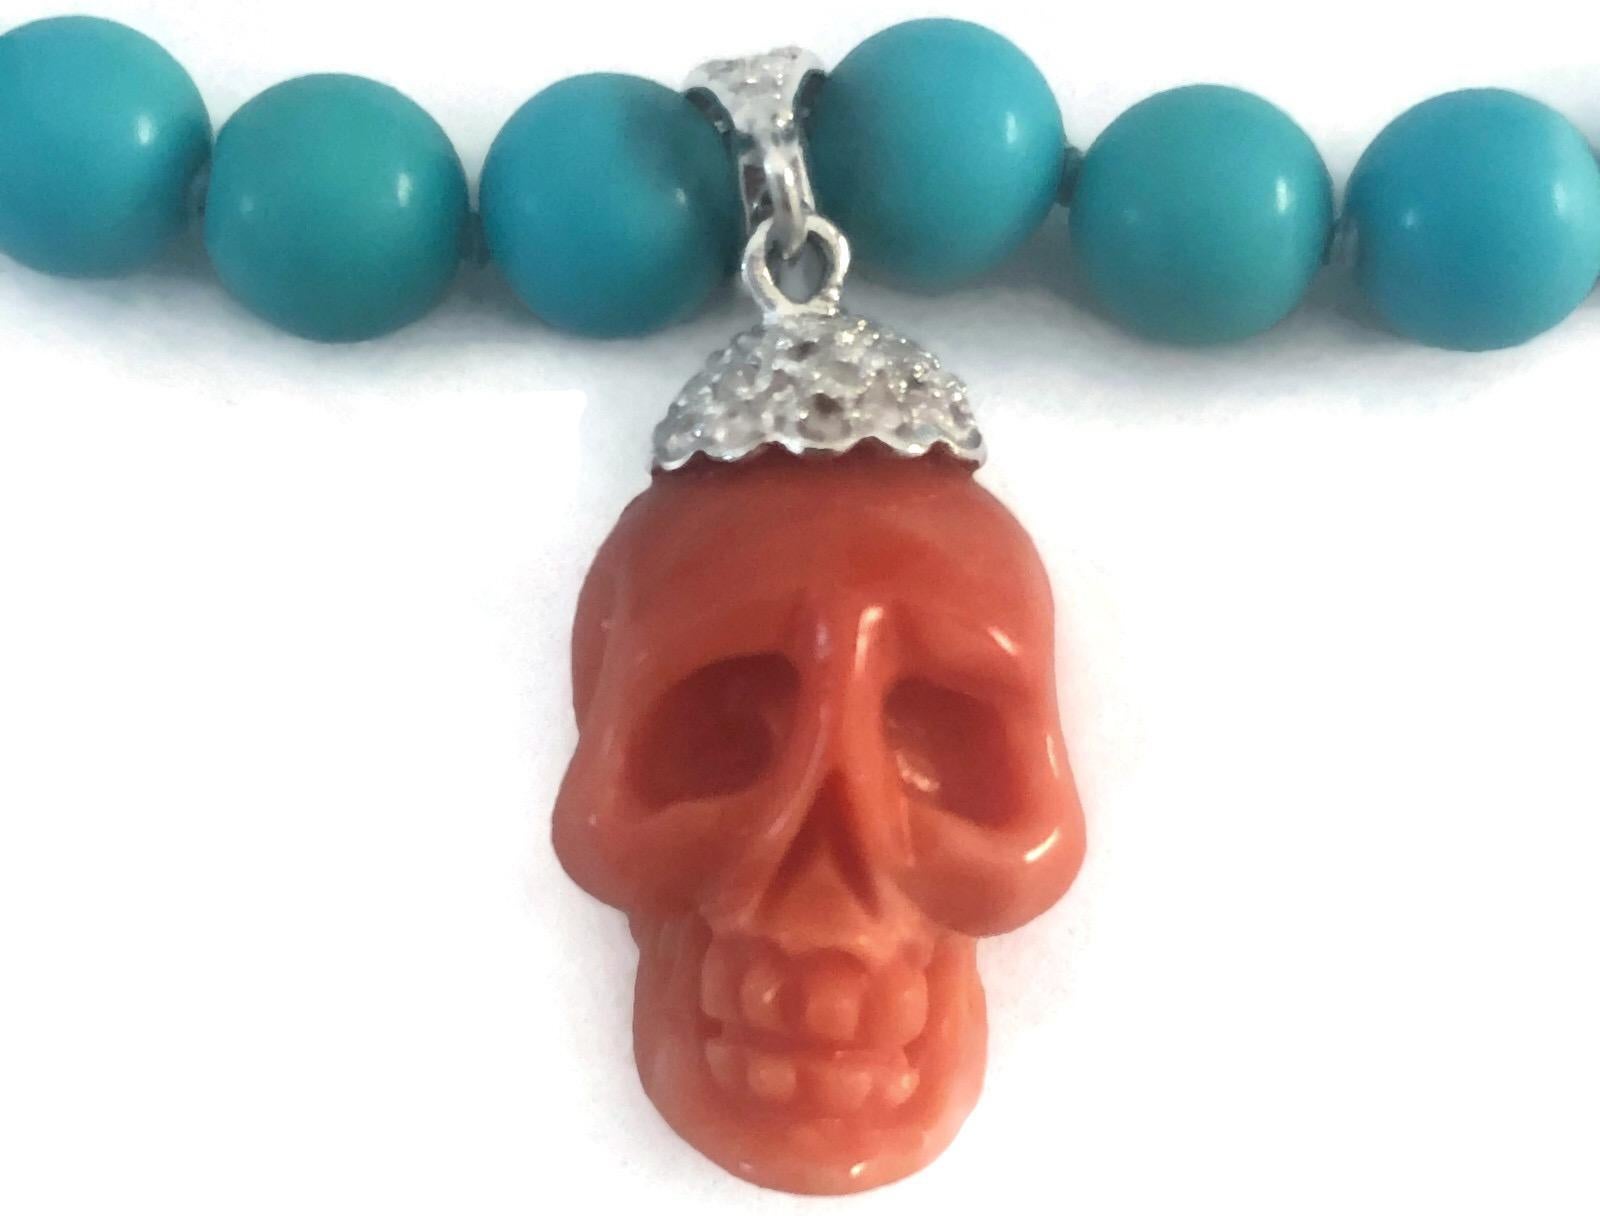 Stunningly  beautiful blue Sleeping Beauty necklace of 8-8,5mm turquoise beads with a natural Italian hand-carved skull attached to an 18k white gold bale and cap encrusted with diamonds.  This turquoise and coral necklace has an 18k white gold 